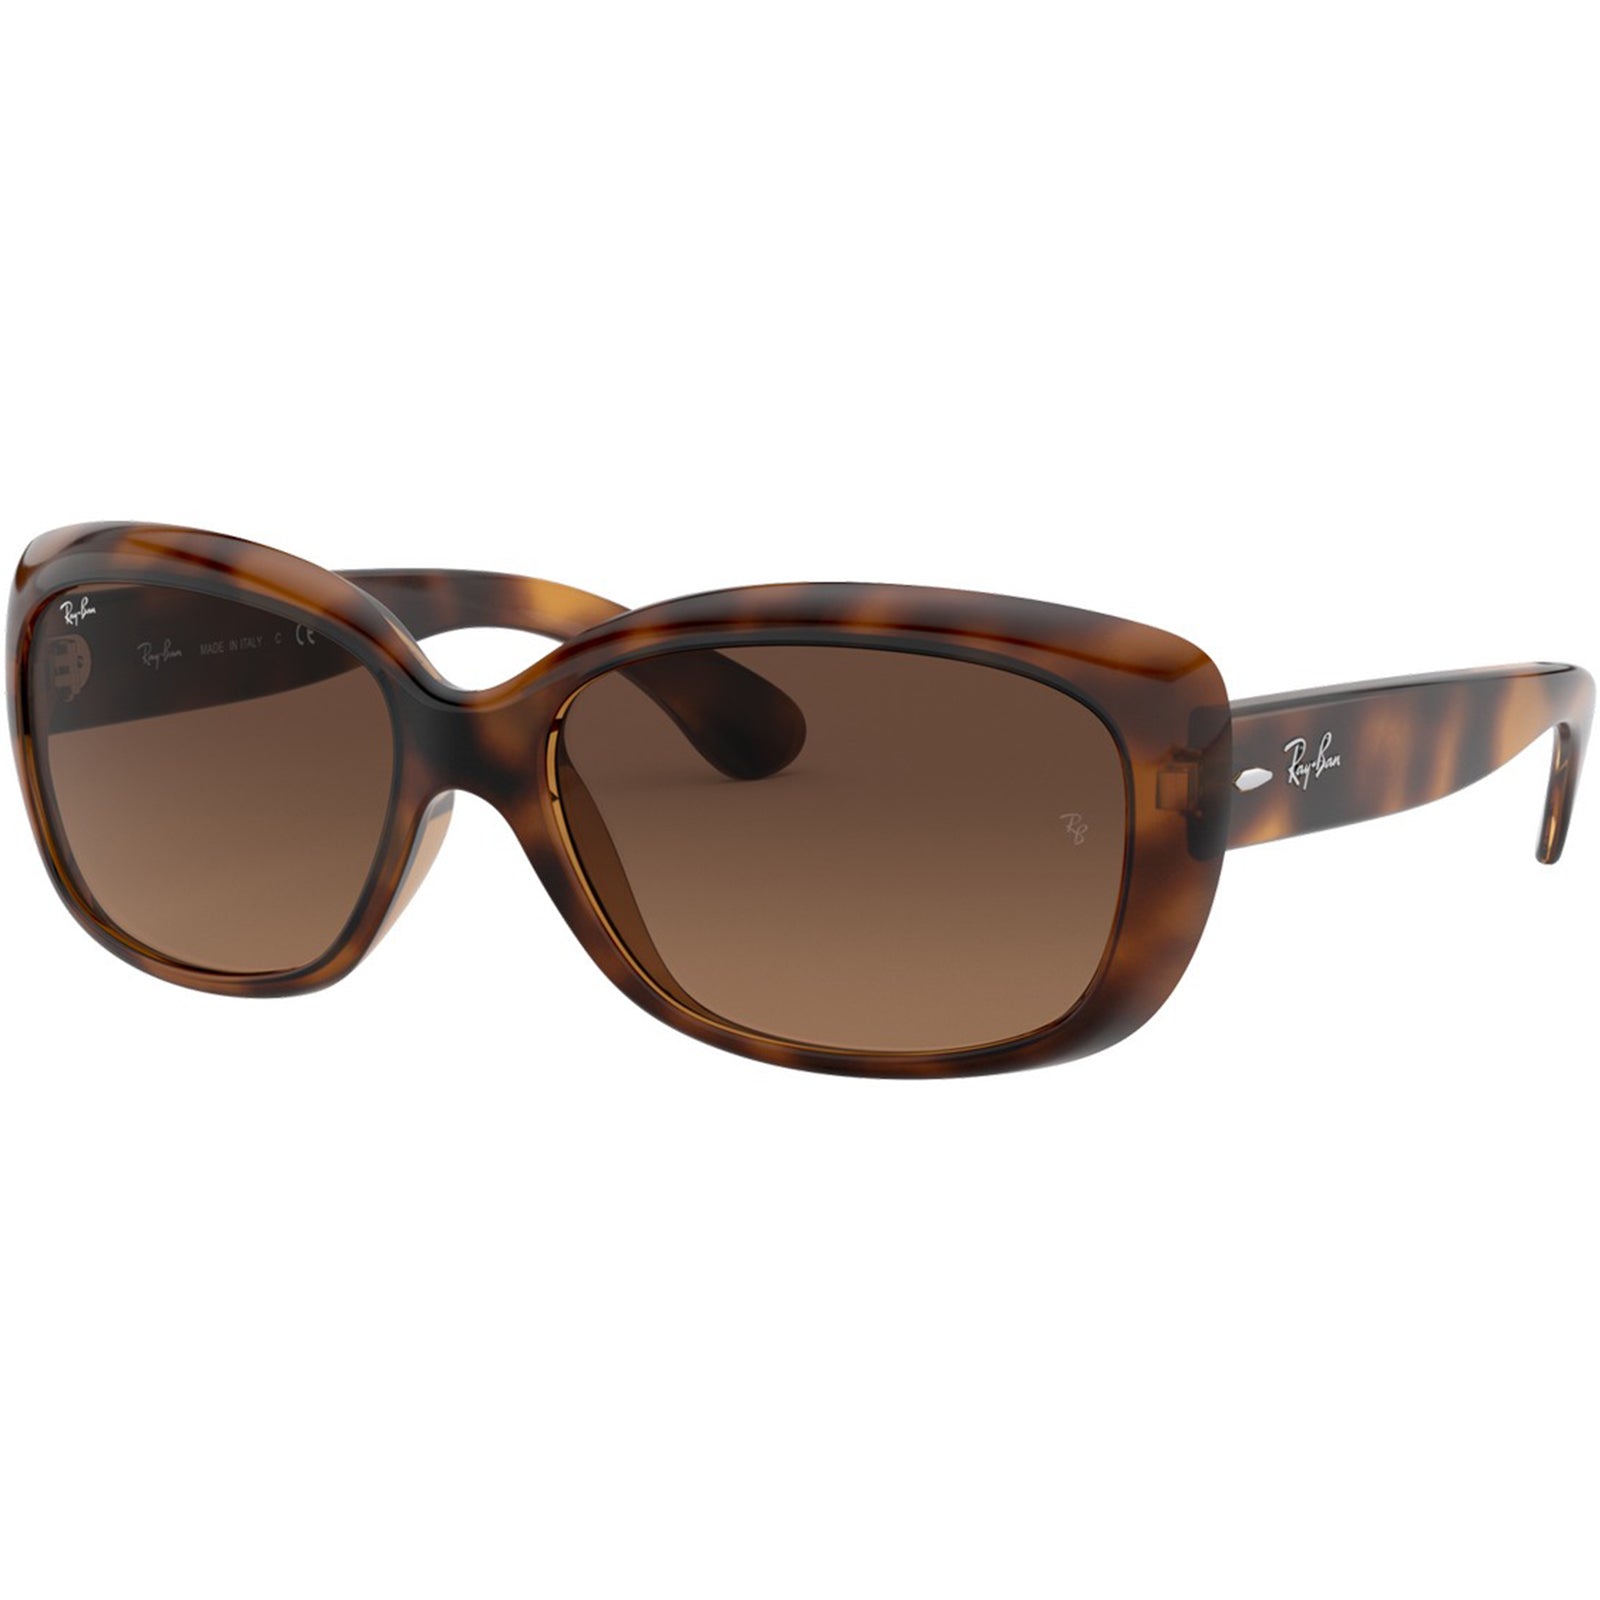 Ray-Ban Jackie Ohh Women's Lifestyle Sunglasses-0RB4101